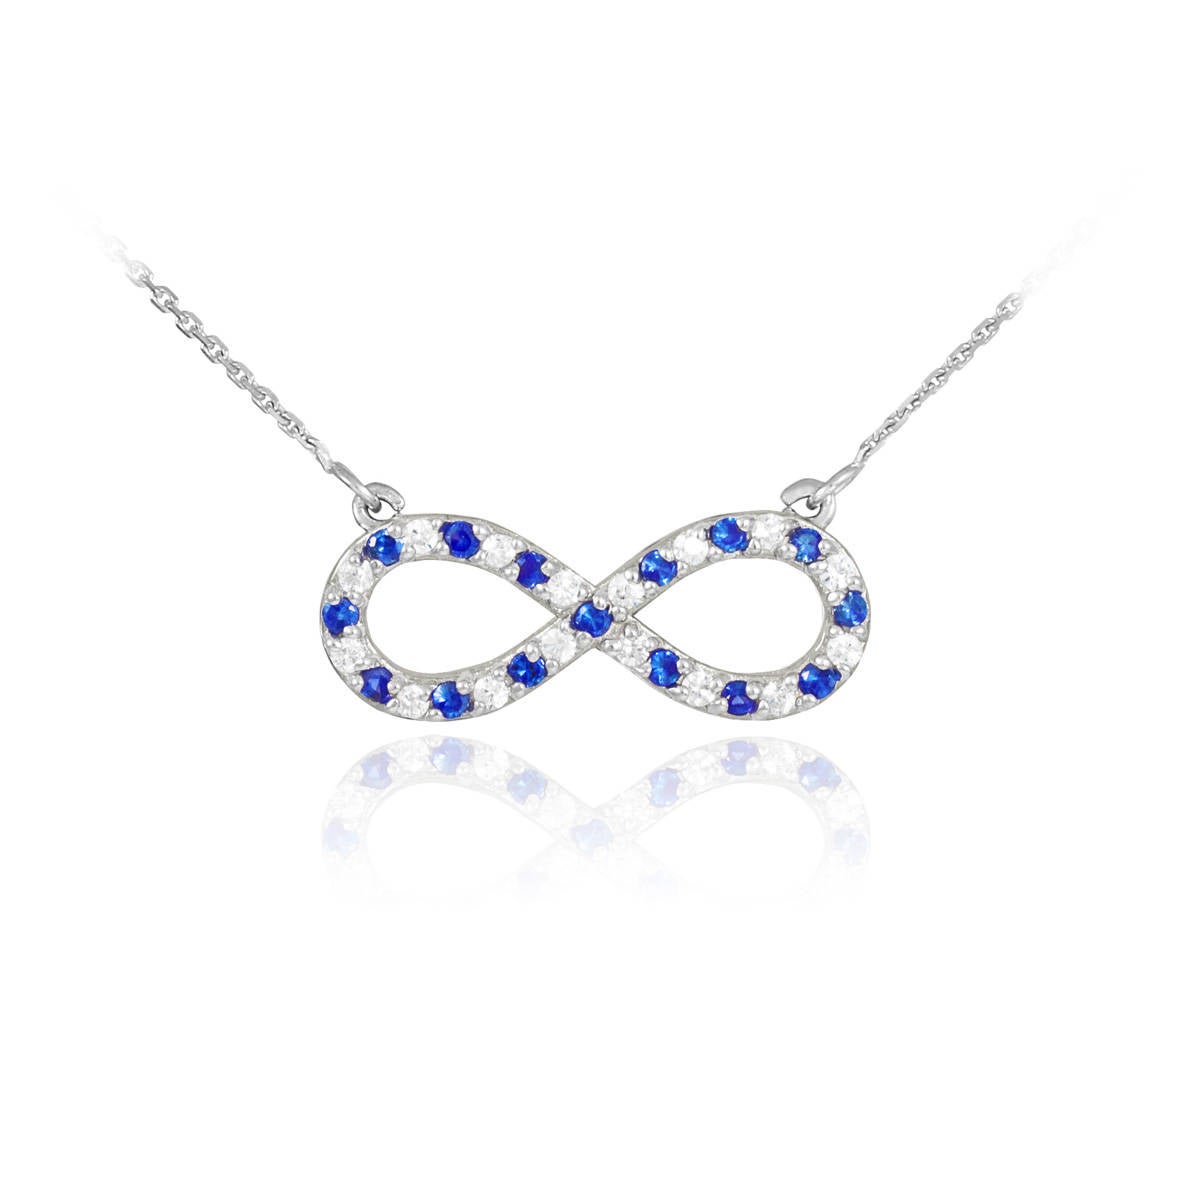 14K Gold Diamond and Sapphire Infinity Necklace (yellow, white, rose gold) Karma Blingz